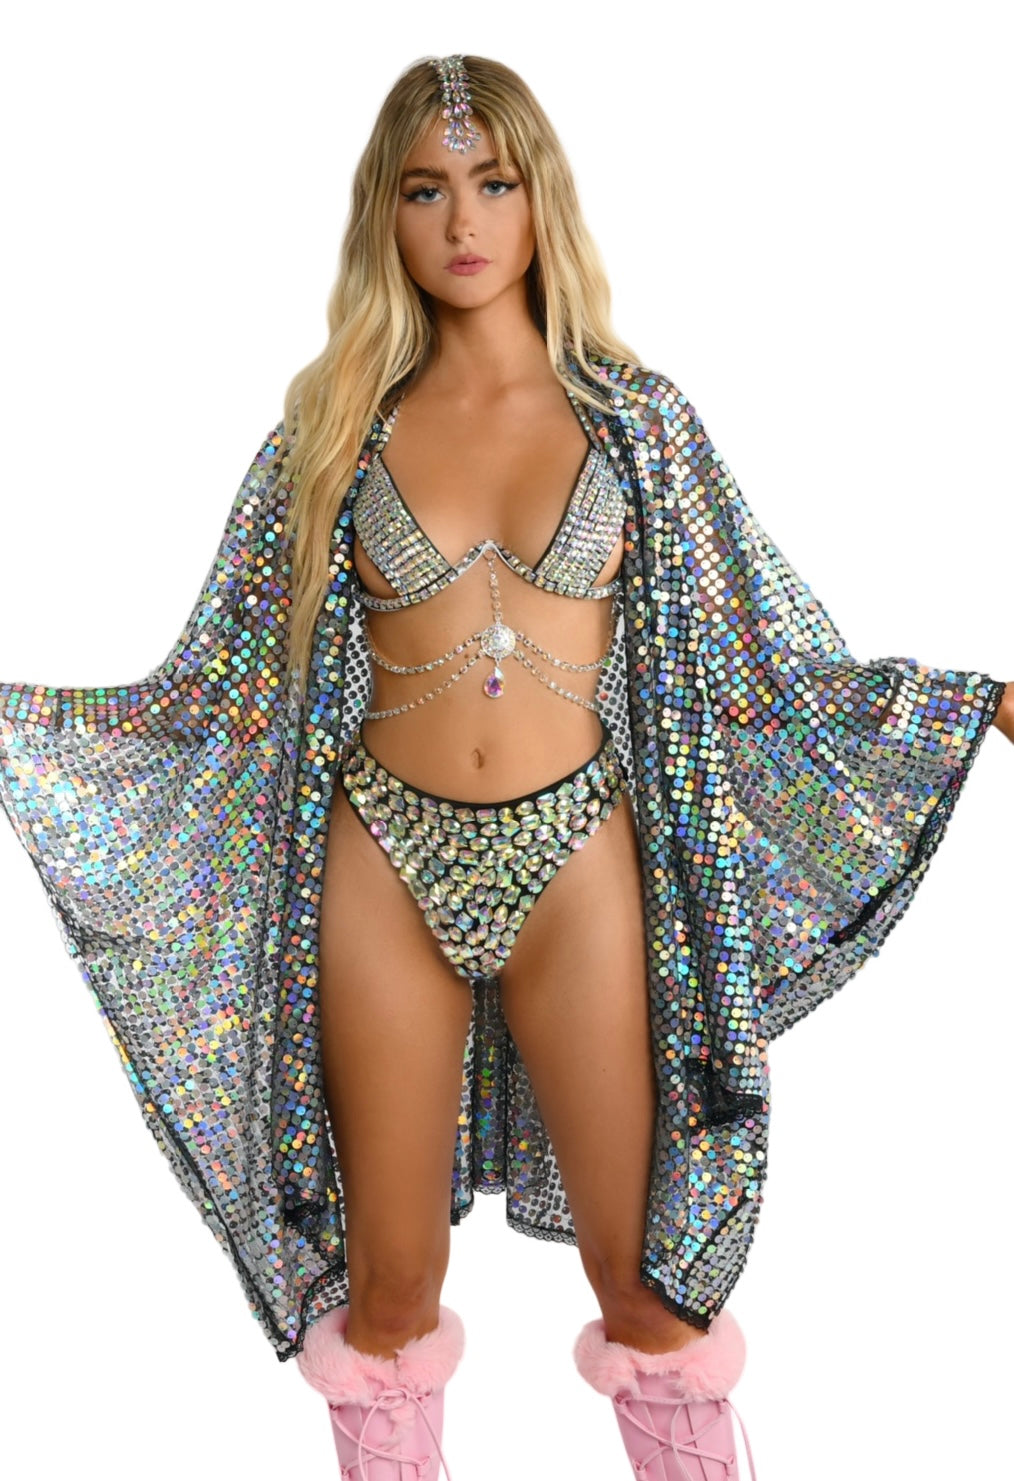 Yomorio Holographic Rave Outfits for Women Metallic Sequin Skirt